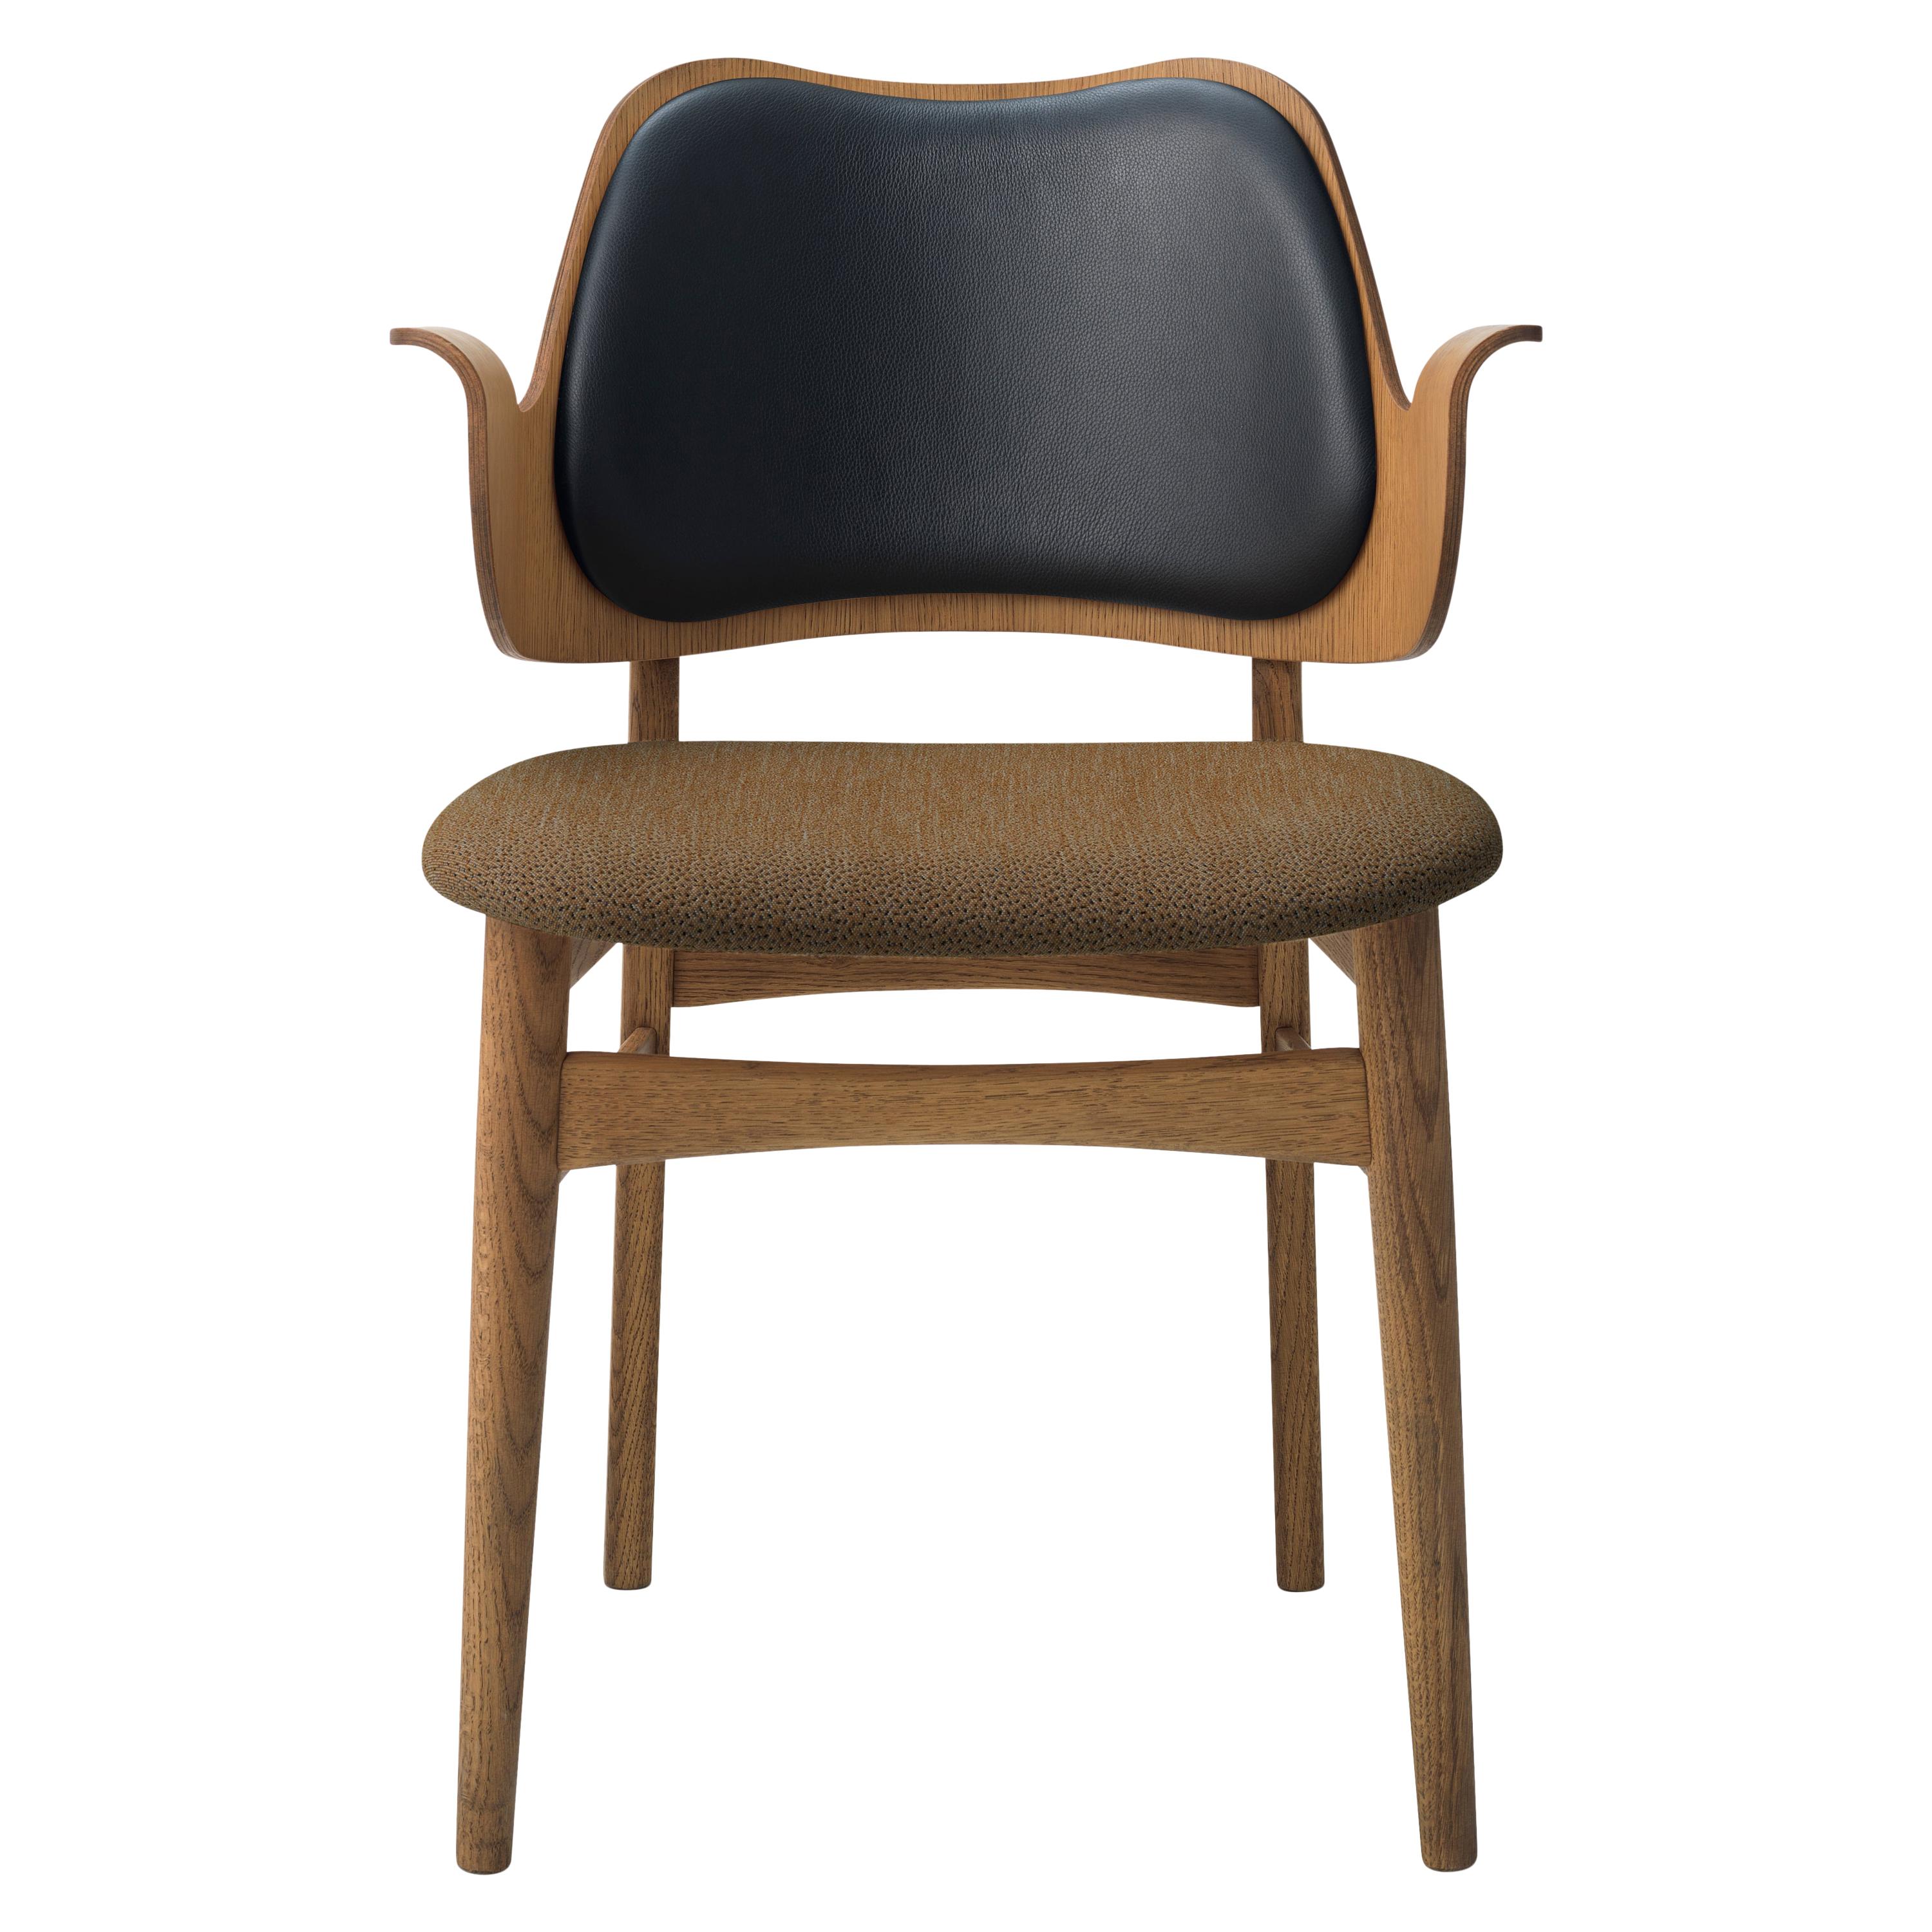 Gesture Two-Tone Fully Upholstered Chair in Teak, by Hans Olsen from Warm Nordic